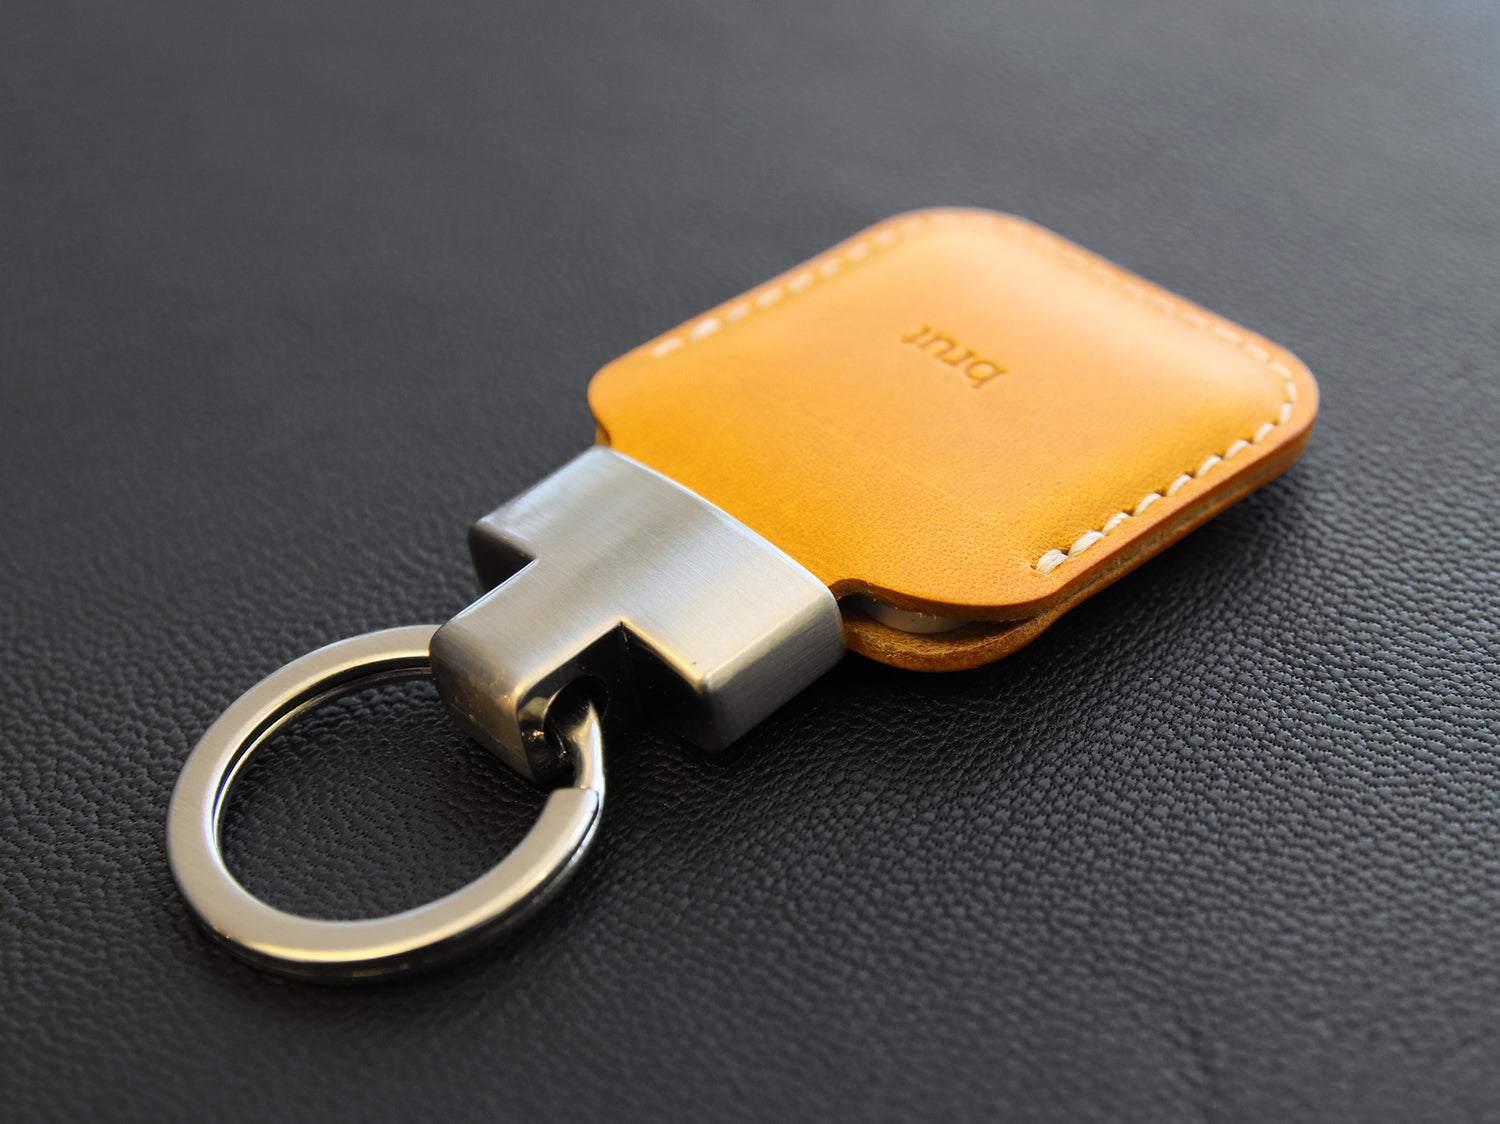 Tile Mate Key Chain Case Leather Cover [2018, 2020]